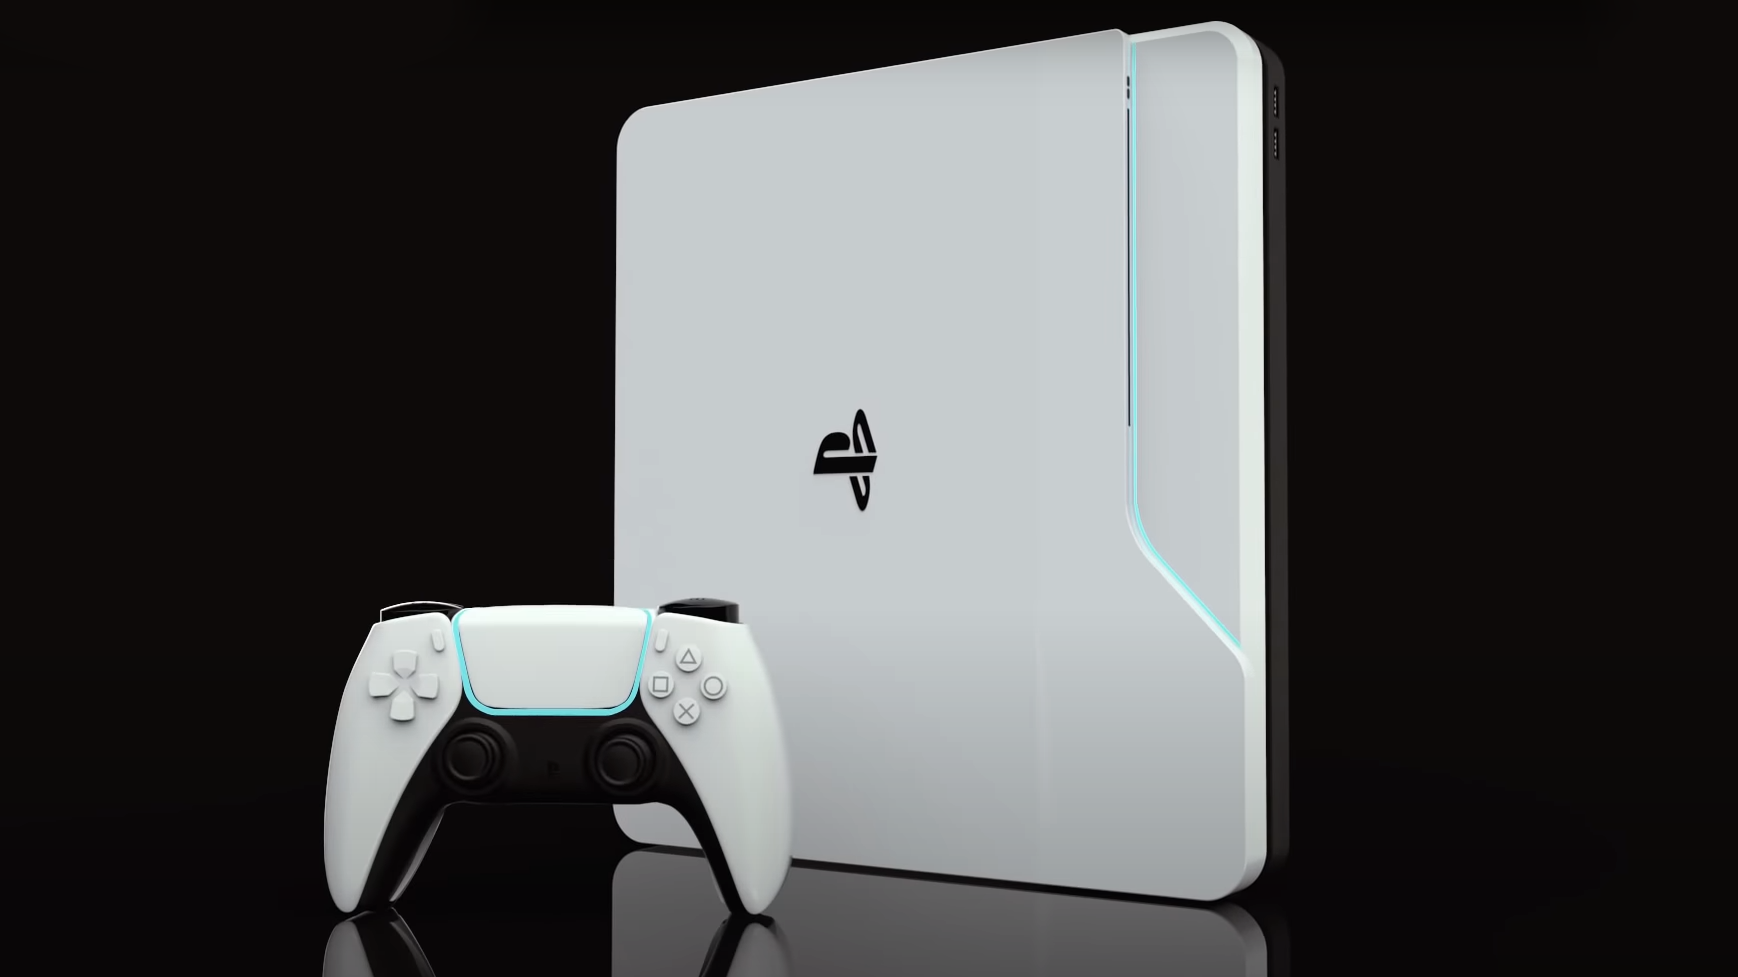 PS5 Comes With 2 Edition What Price, Features, and Games